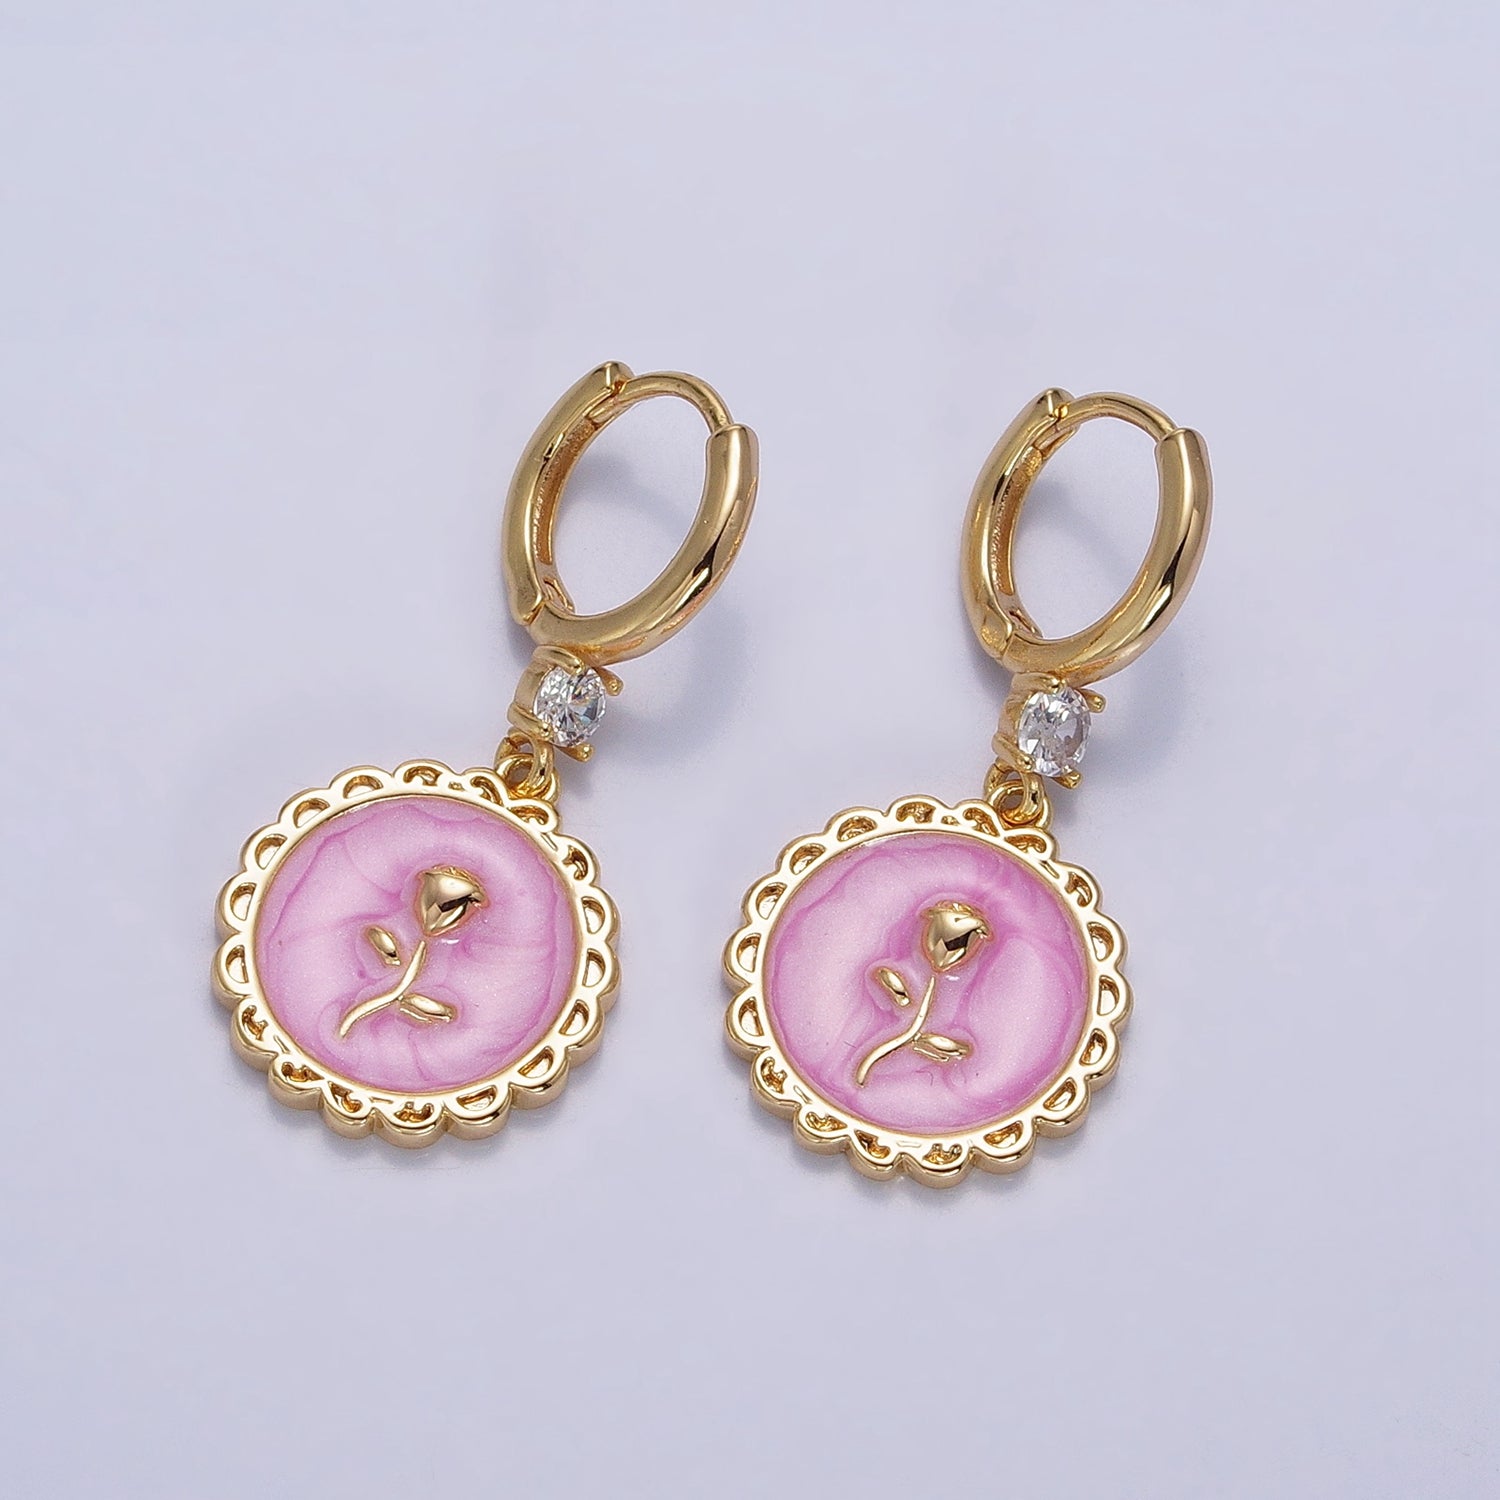 16K Gold Filled White, Pink, Blue Sparkly Enamel Rose Flower Round CZ Drop Huggie Earrings | AB1469 - AB1471